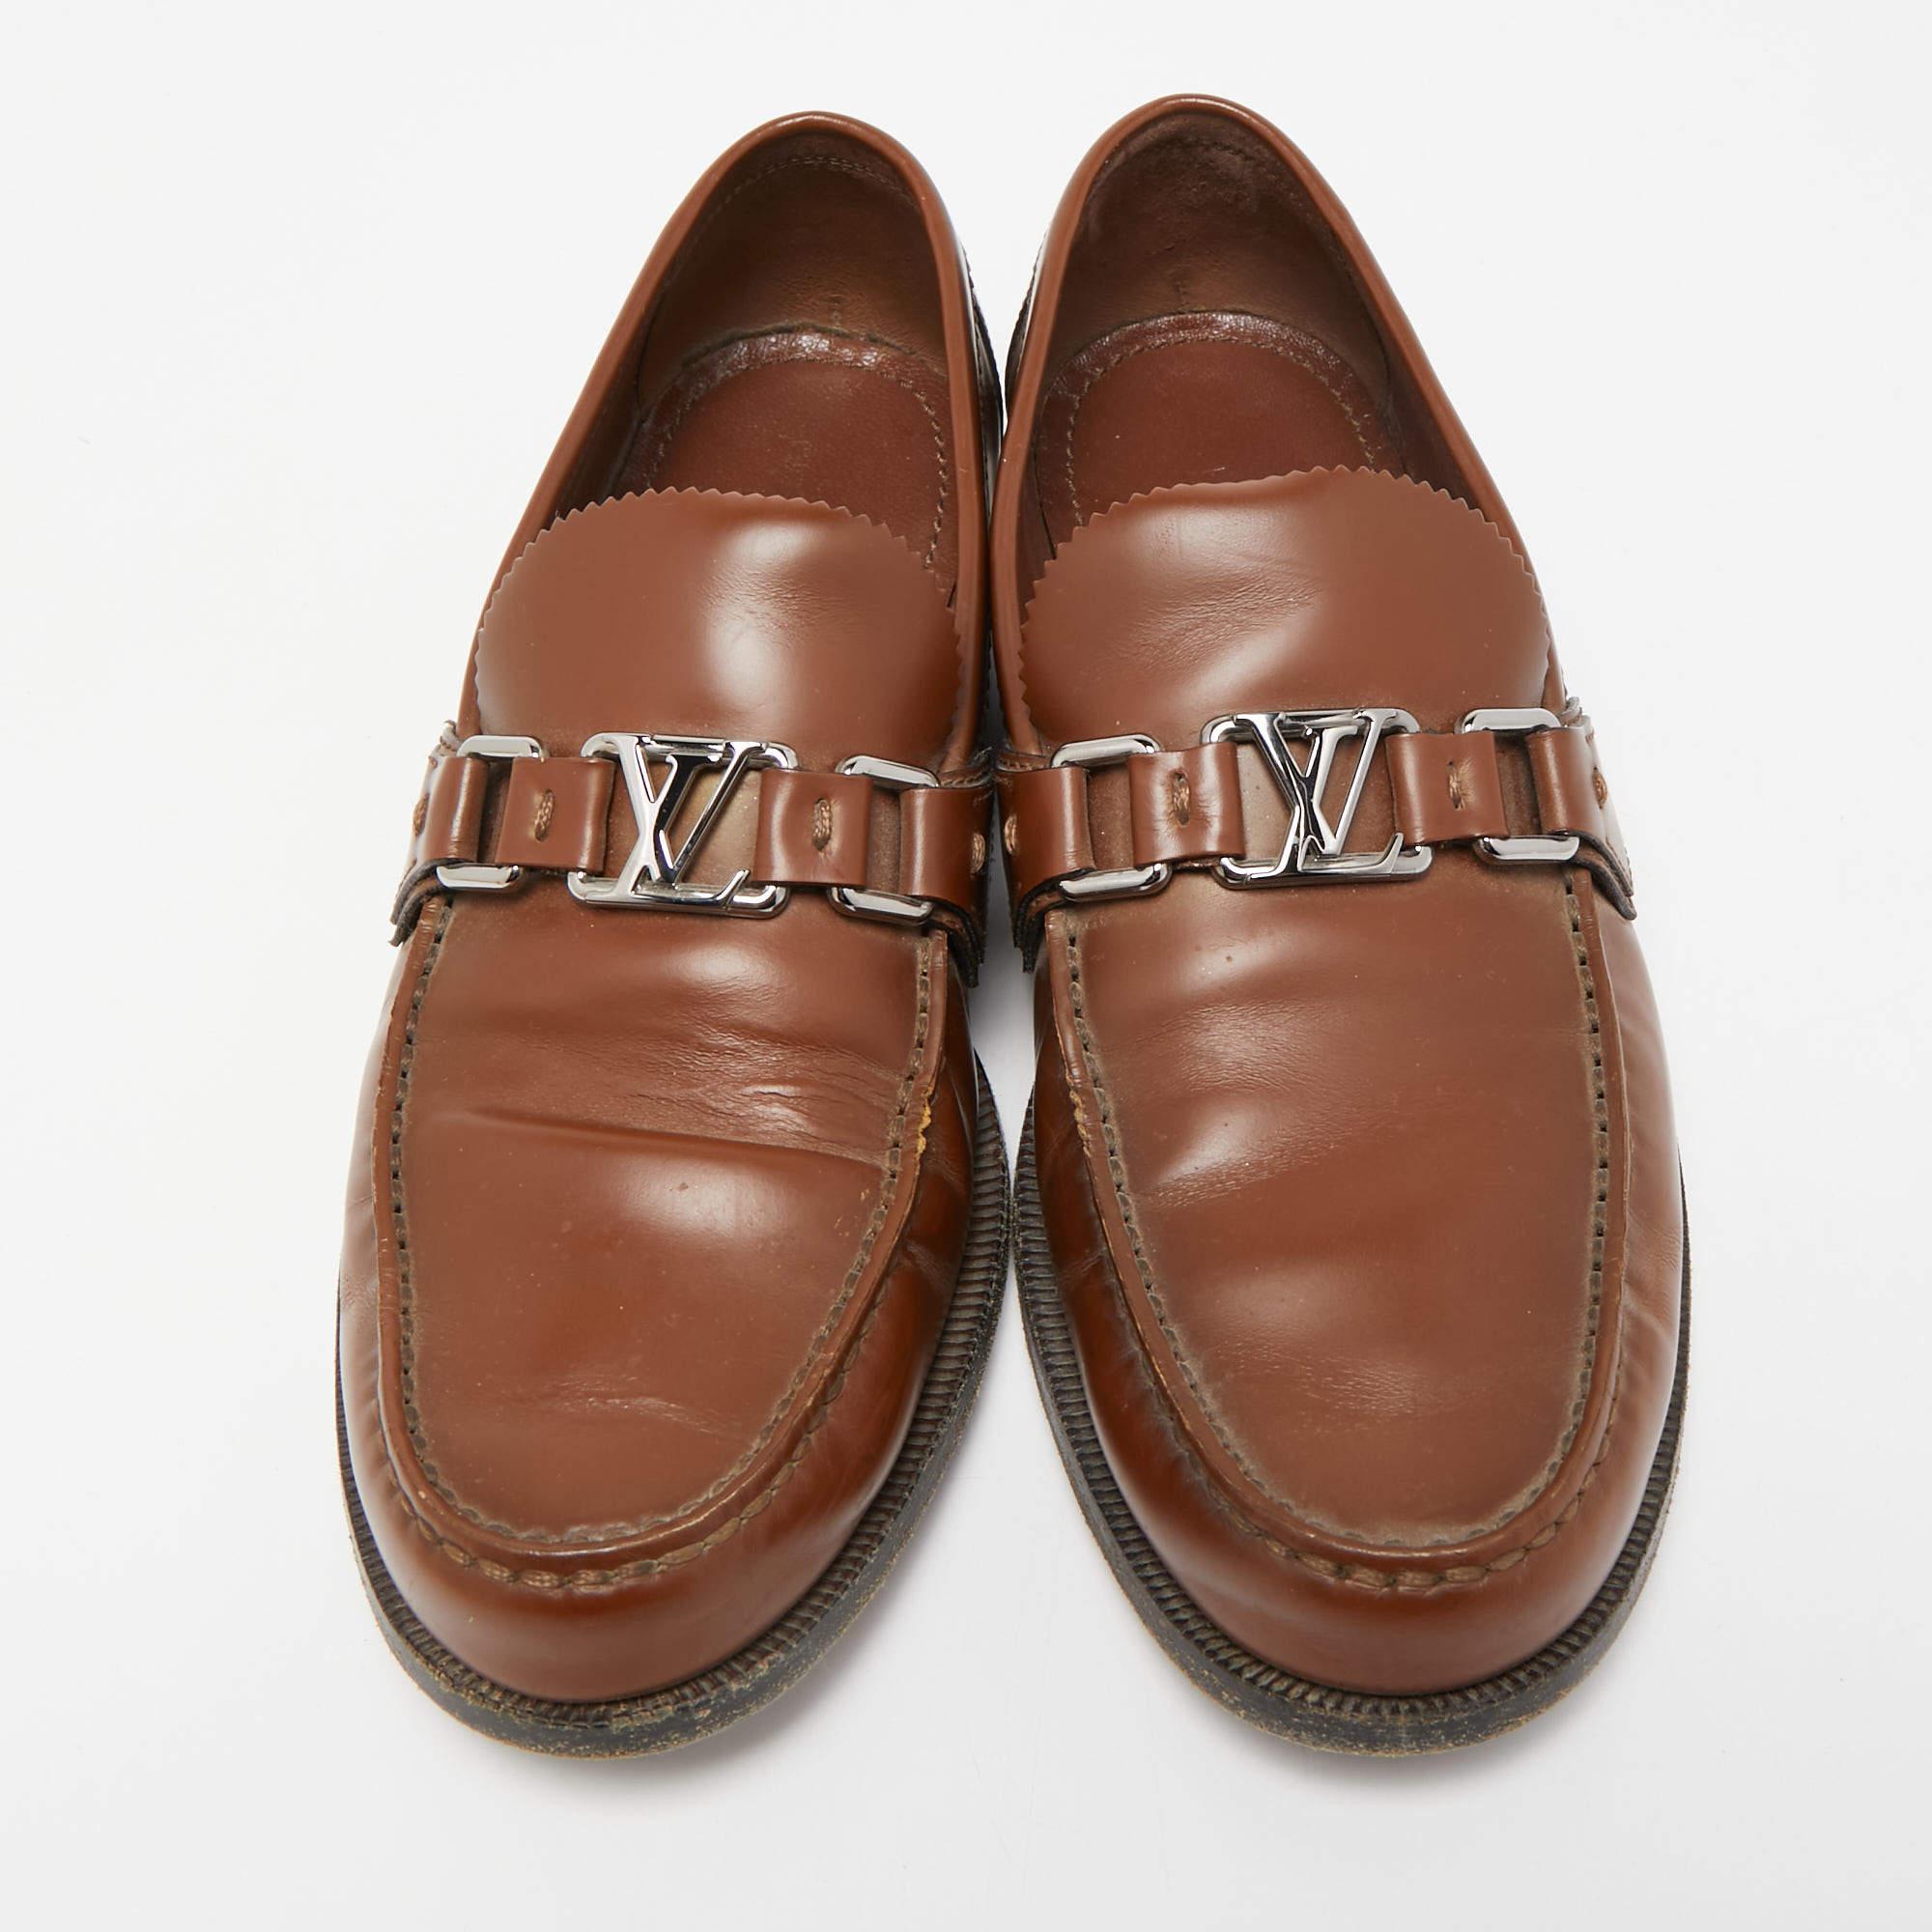 Practical, fashionable, and durable—these designer loafers are carefully built to be fine companions to your formal style. They come made using the best materials to be a prized buy.

Includes: Original Dustbag

